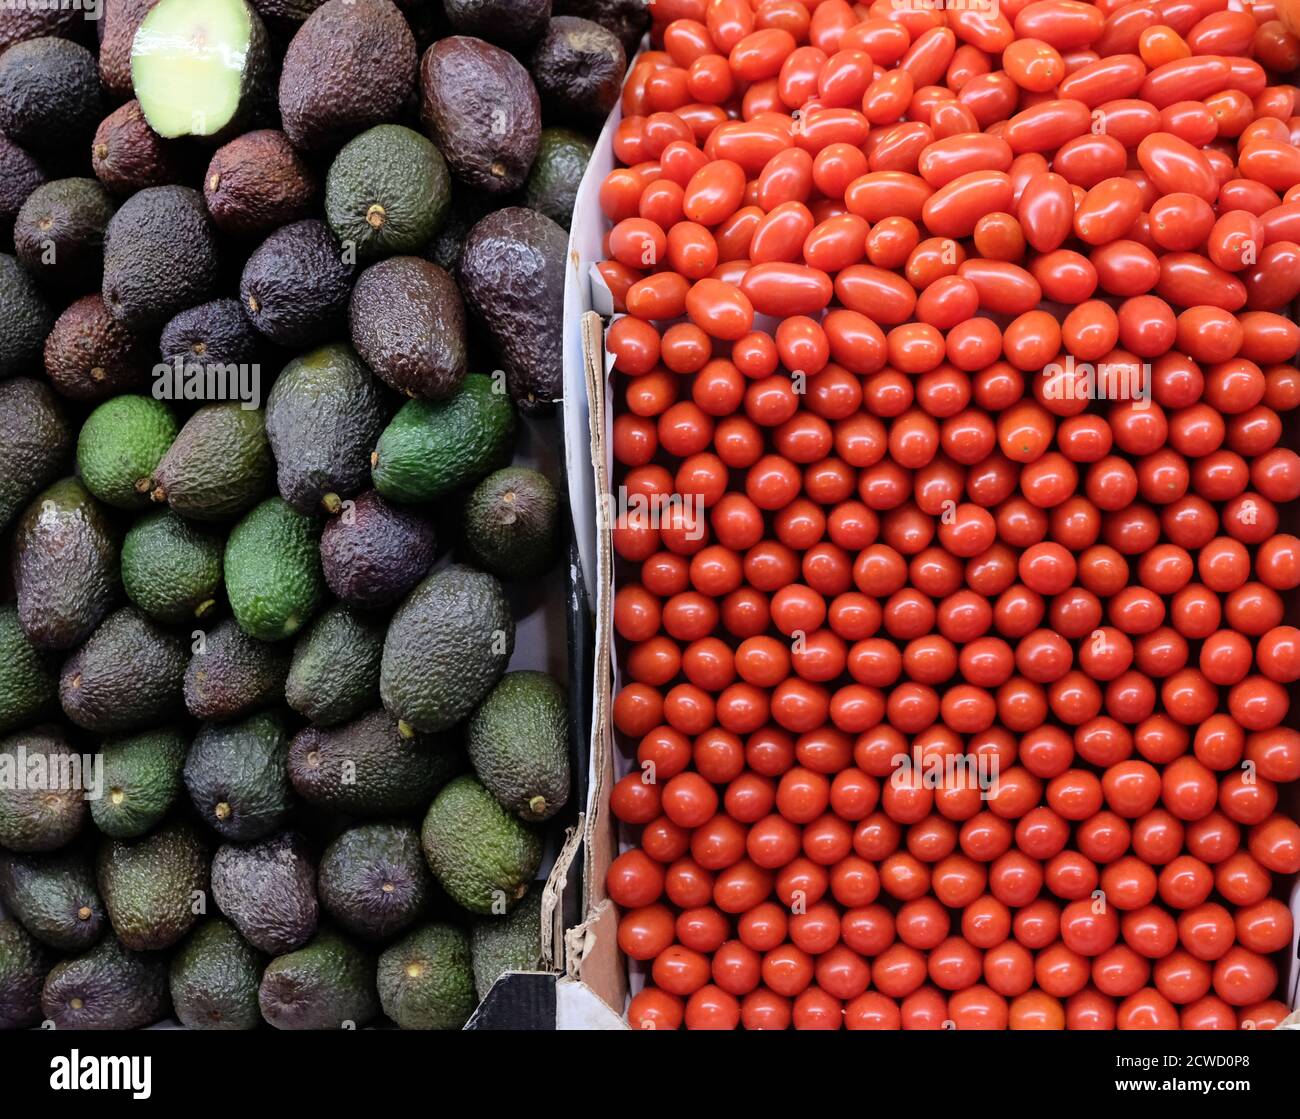 Nicely stacked tomatoes and avocados on a truck Stock Photo